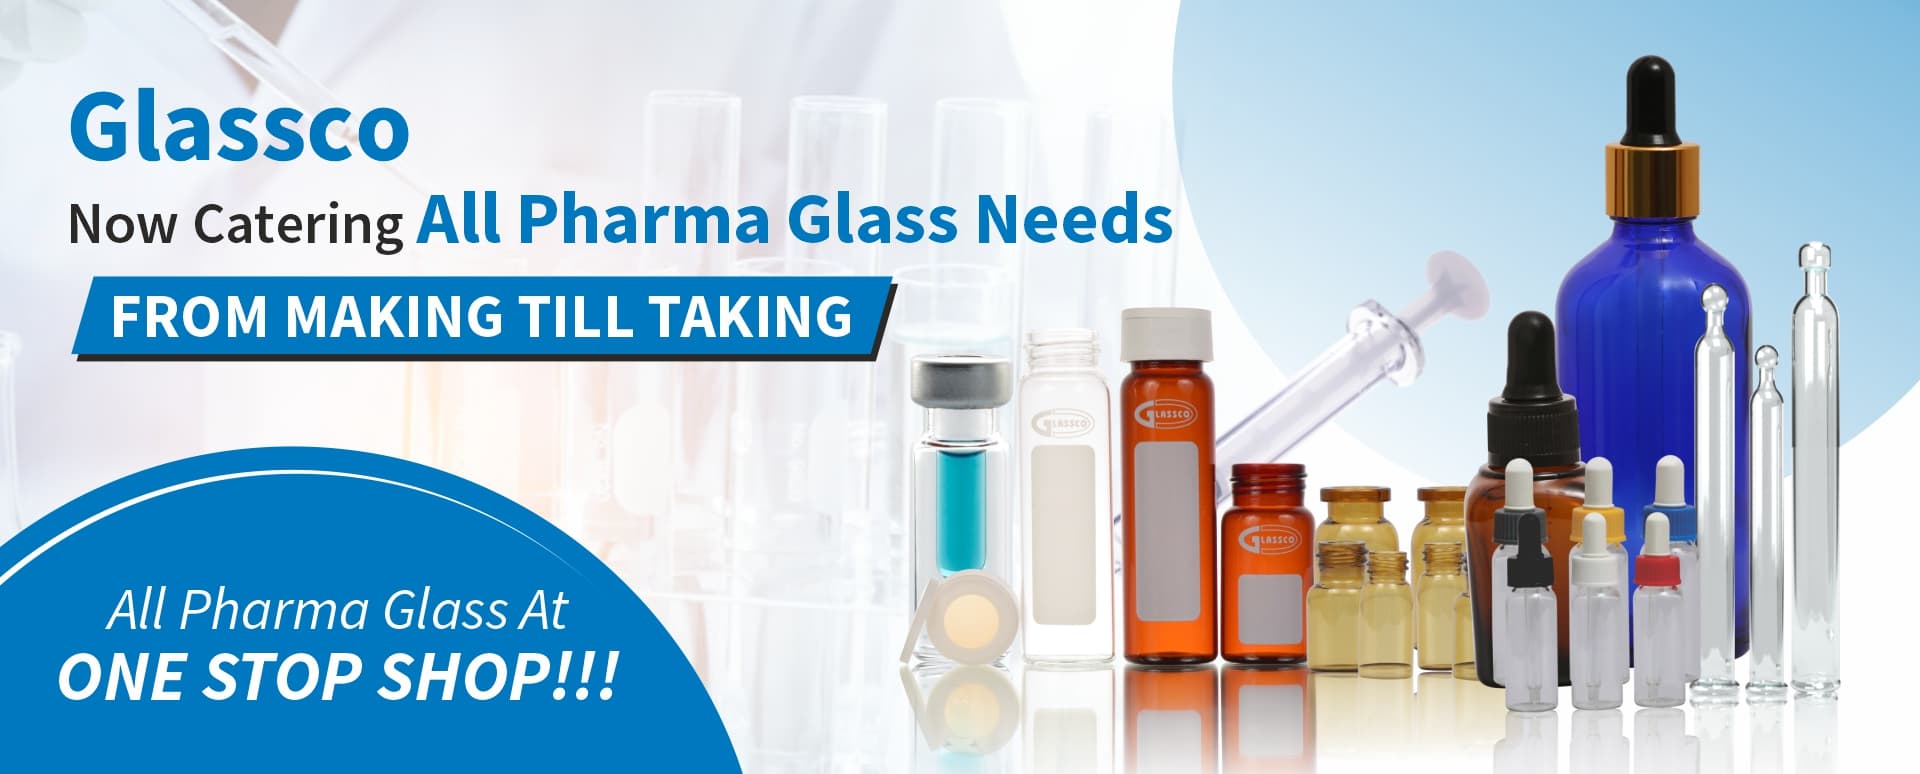 Glassco Labs Now Catering All Pharma Glass Needs. From Making Till Taking